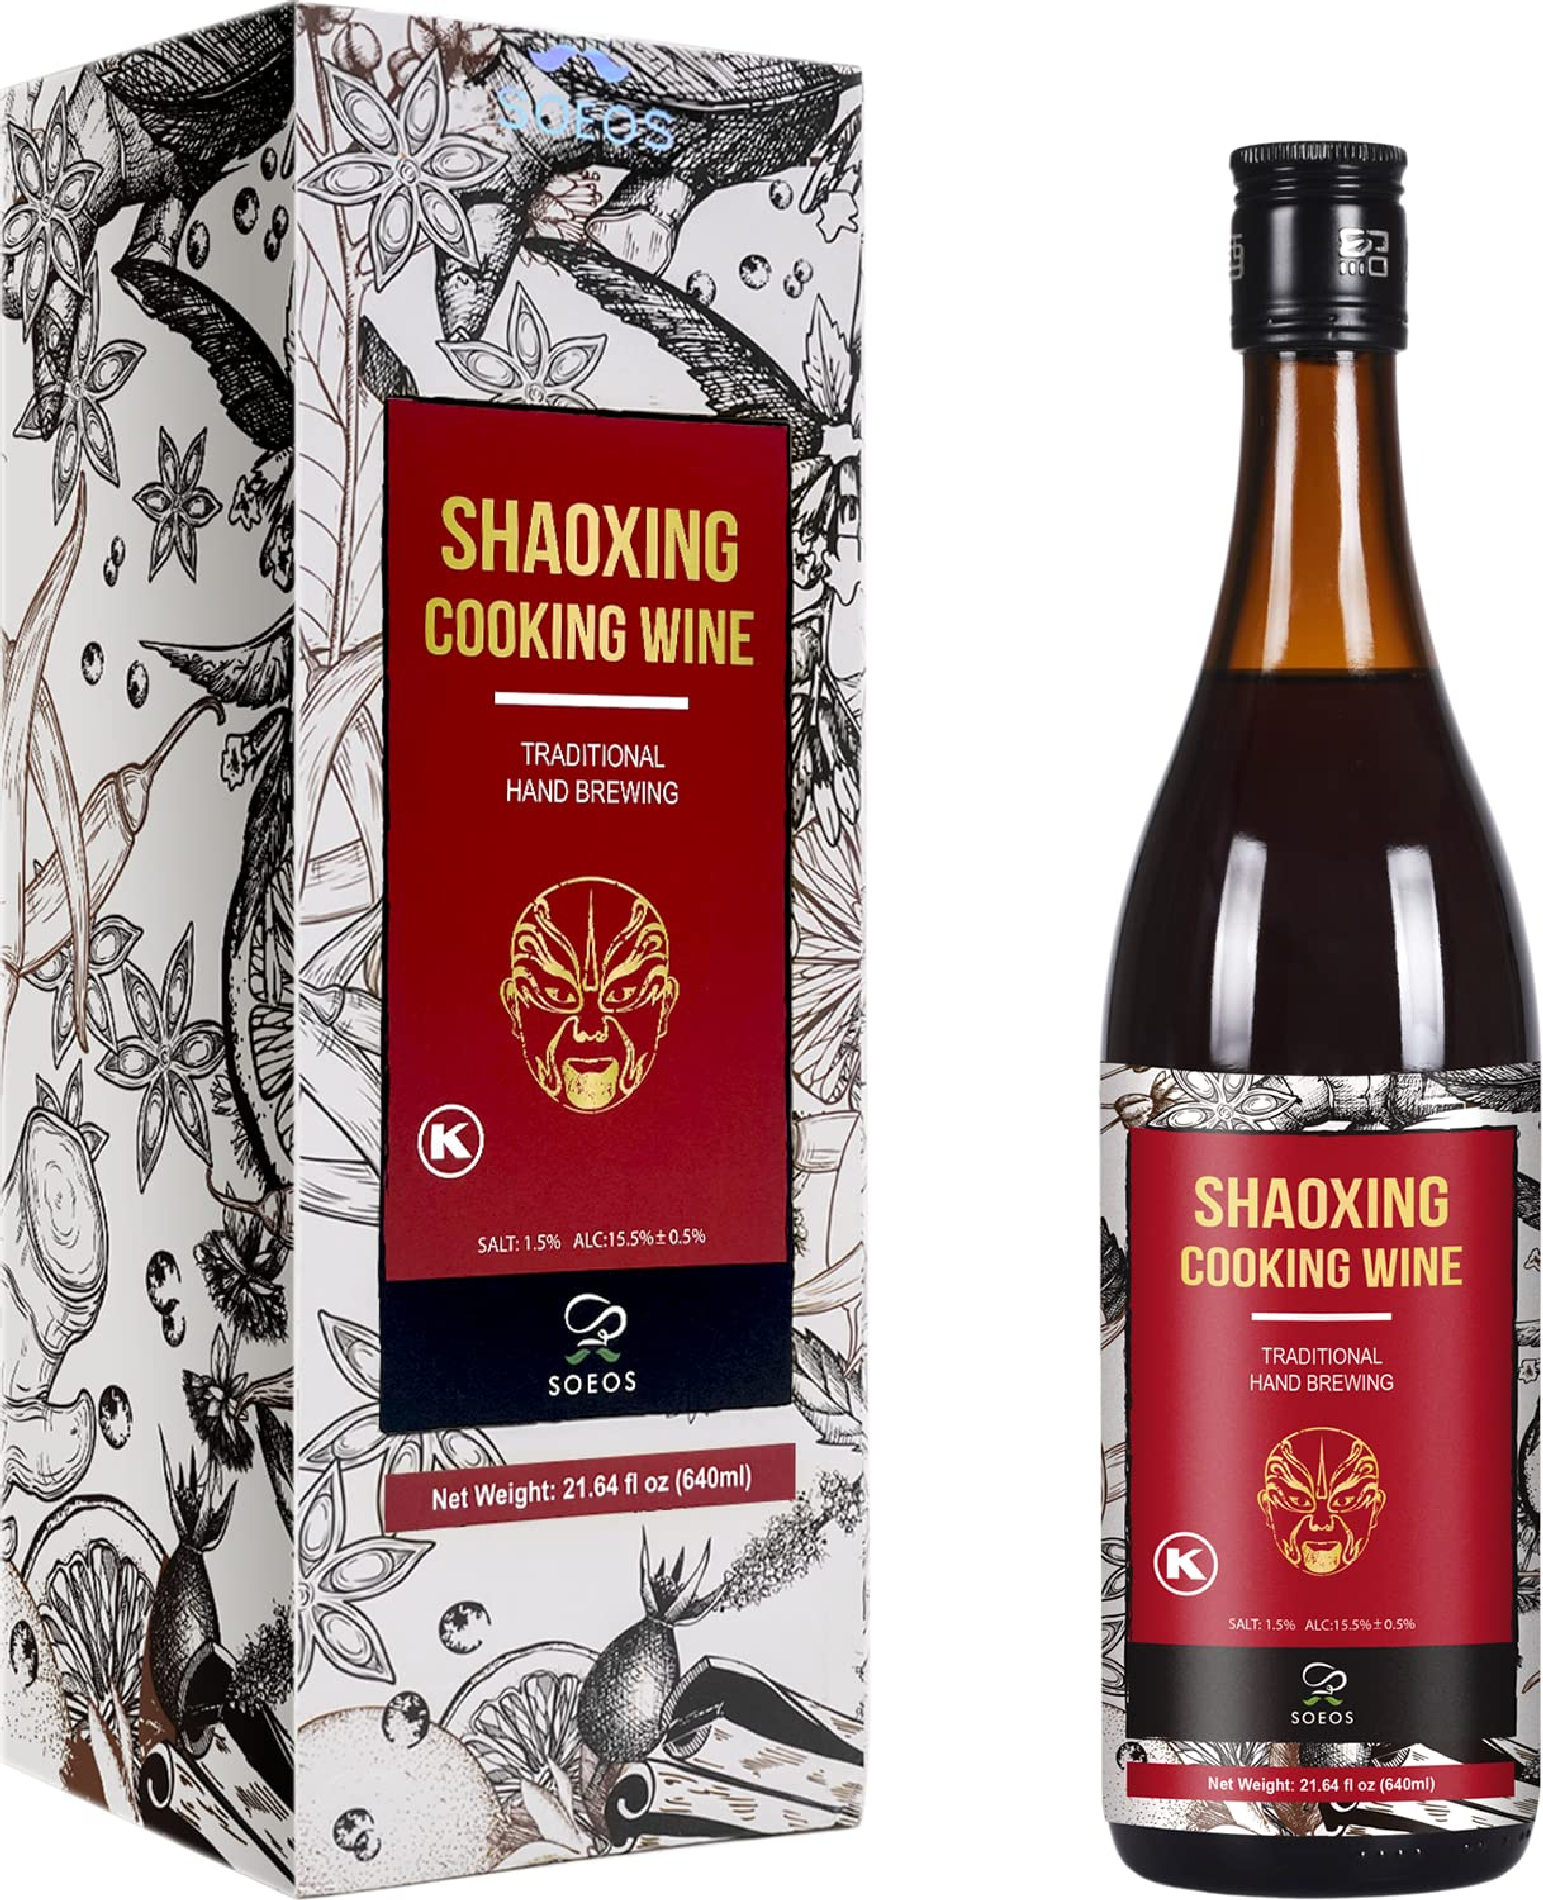 shaoxing wine - traditional hand brewing